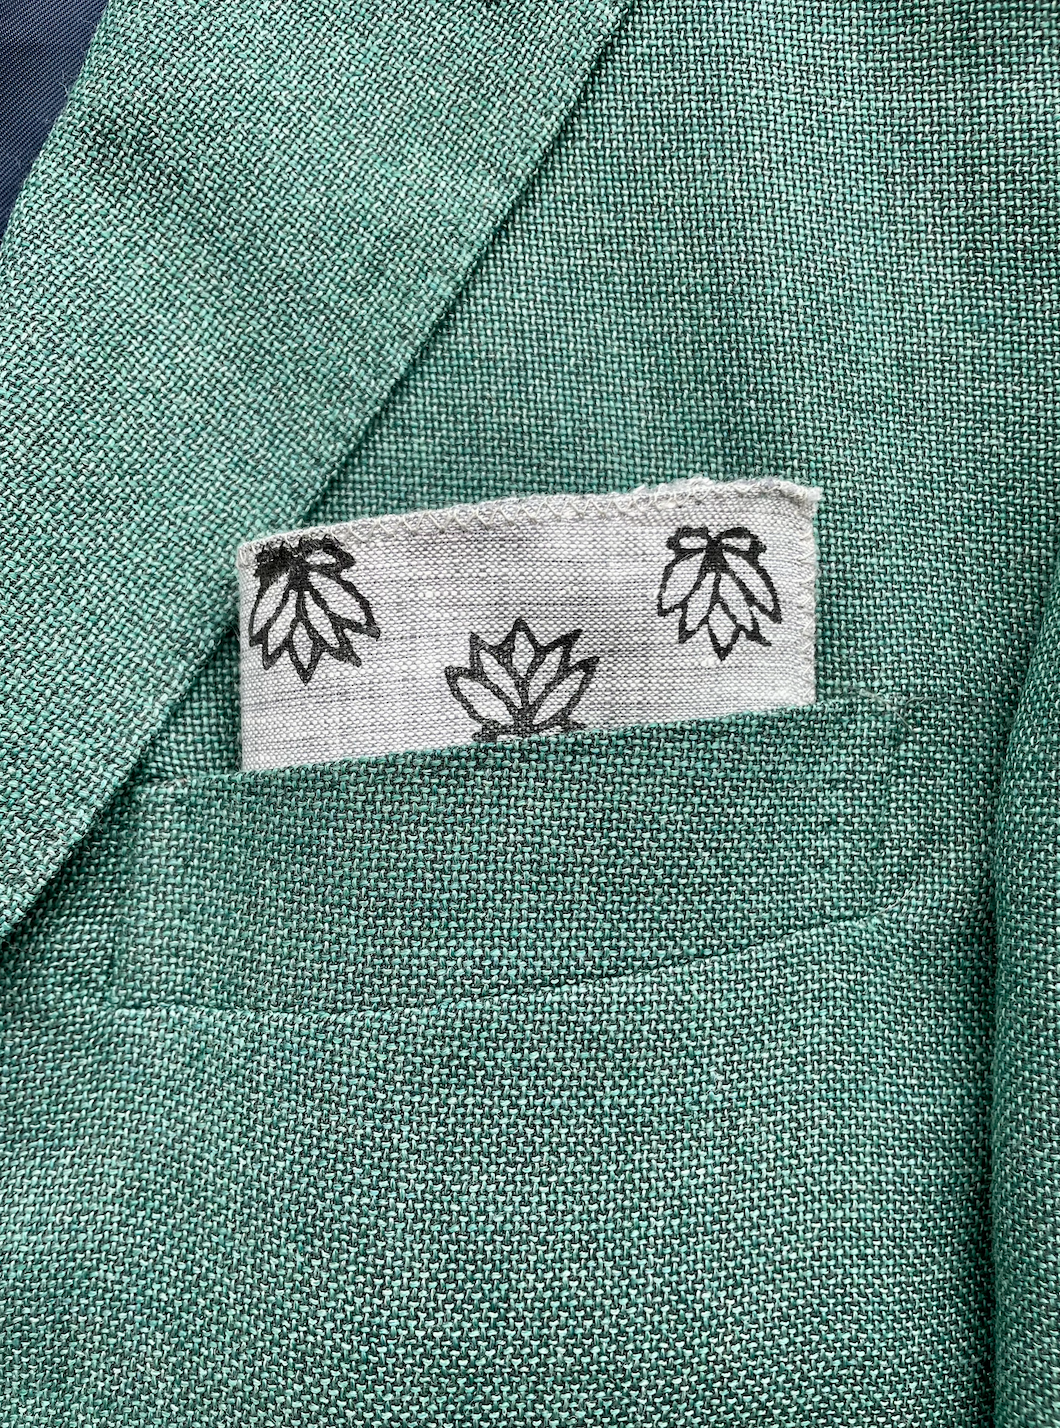 Pocket Square - Gray Linen with Baby Lotus, Black by Mended